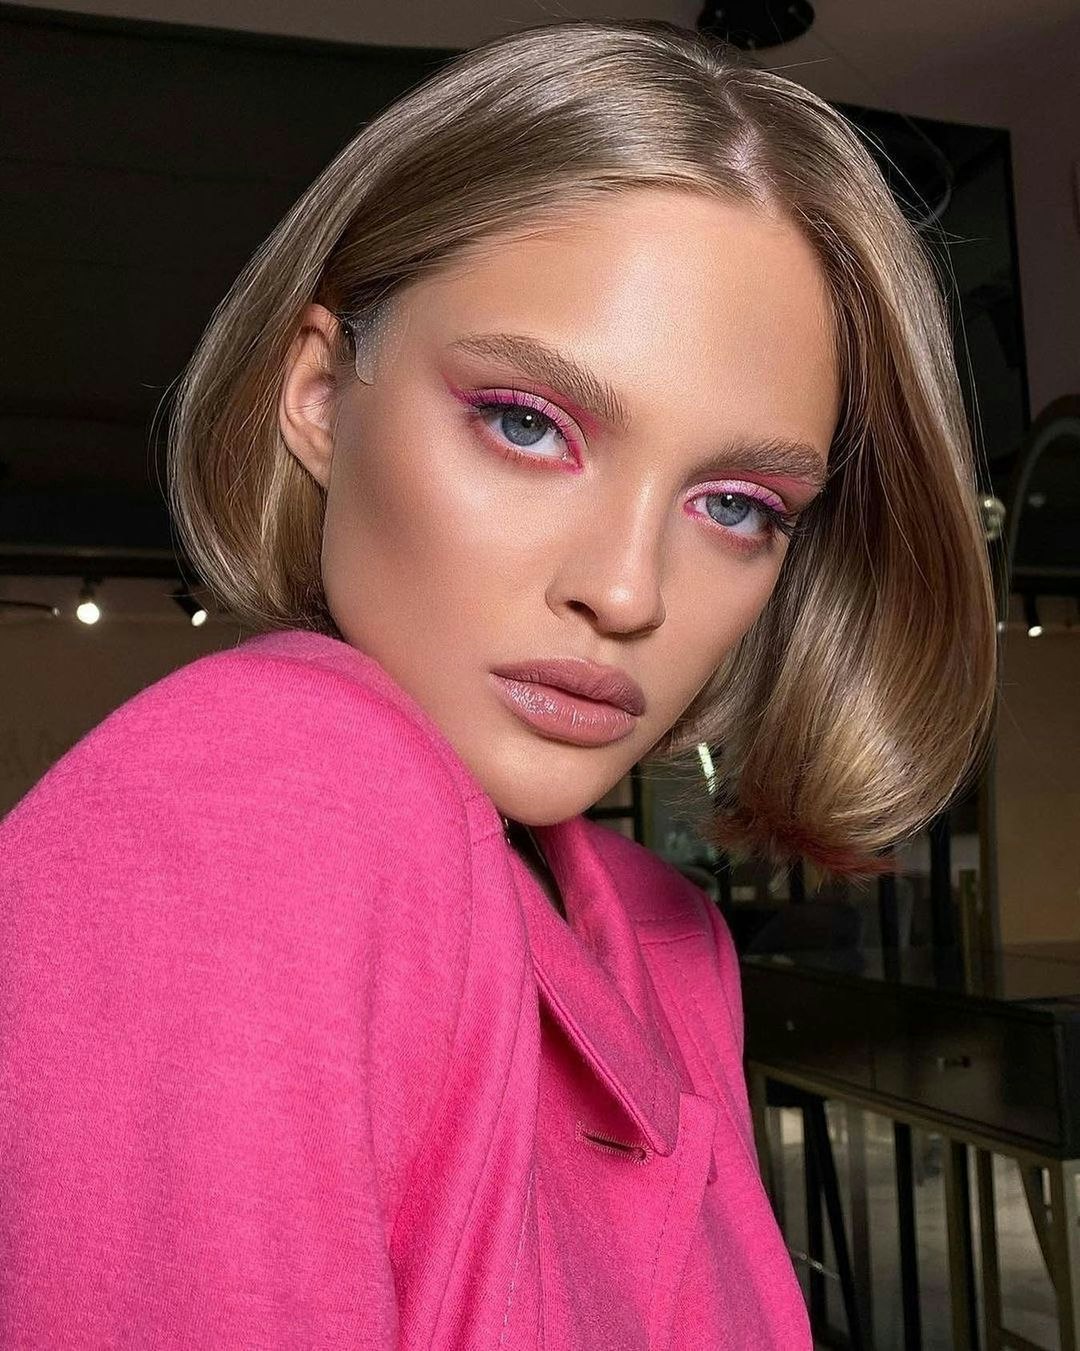 Colorful Eyeliner is the Bold Beauty Look Ruling Fall 2022 - Neon Eyeliner